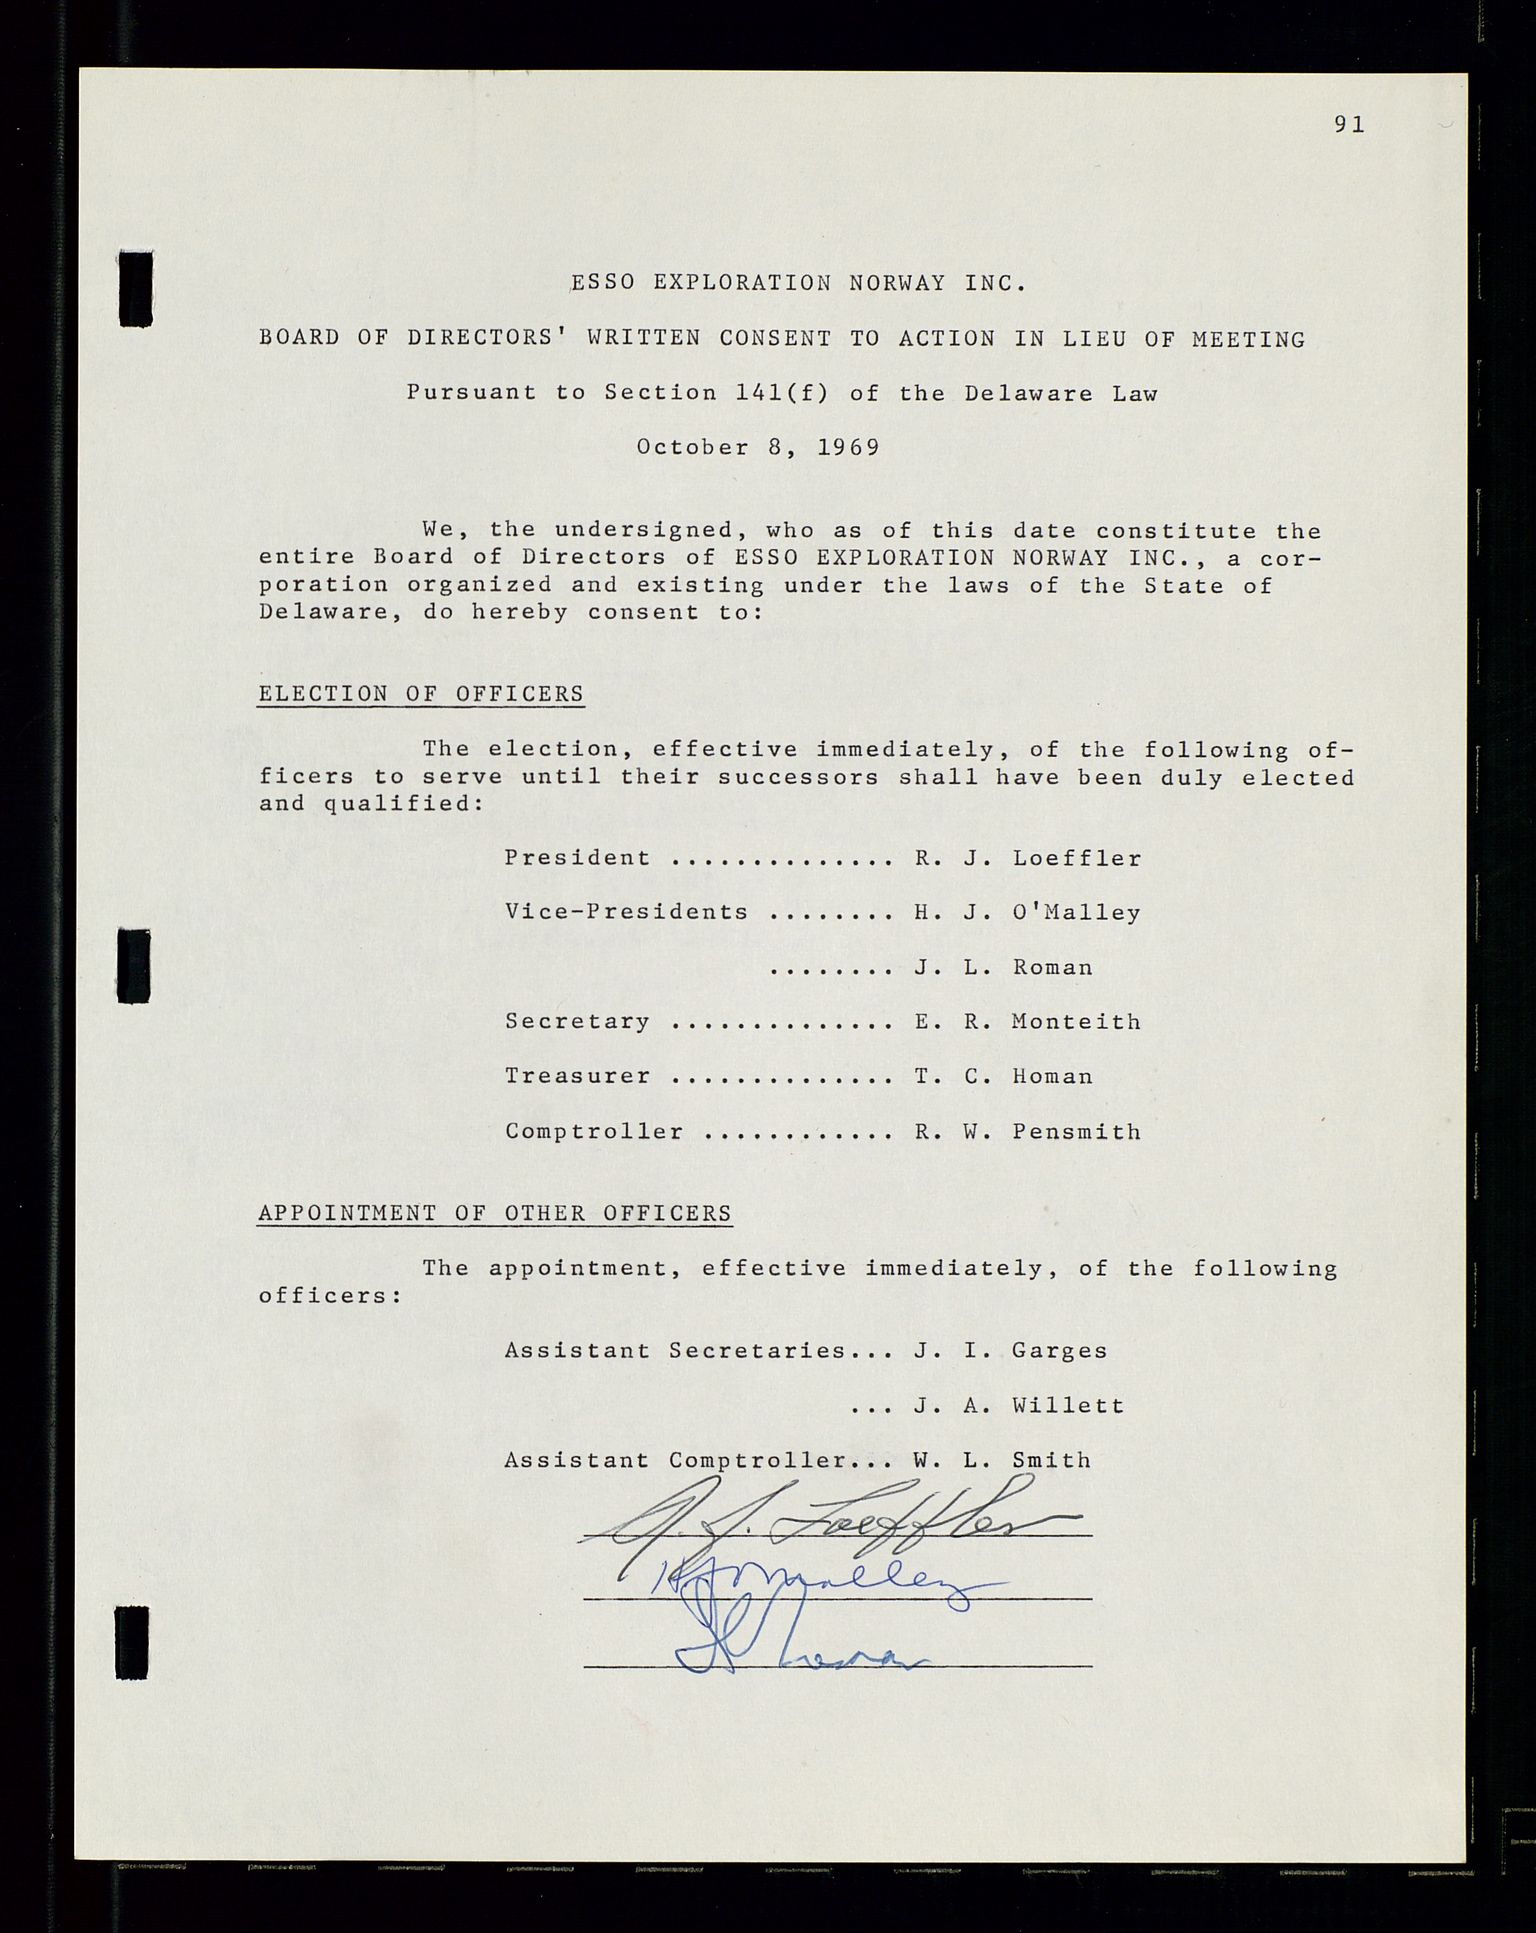 Pa 1512 - Esso Exploration and Production Norway Inc., SAST/A-101917/A/Aa/L0001/0001: Styredokumenter / Corporate records, By-Laws, Board meeting minutes, Incorporations, 1965-1975, s. 91